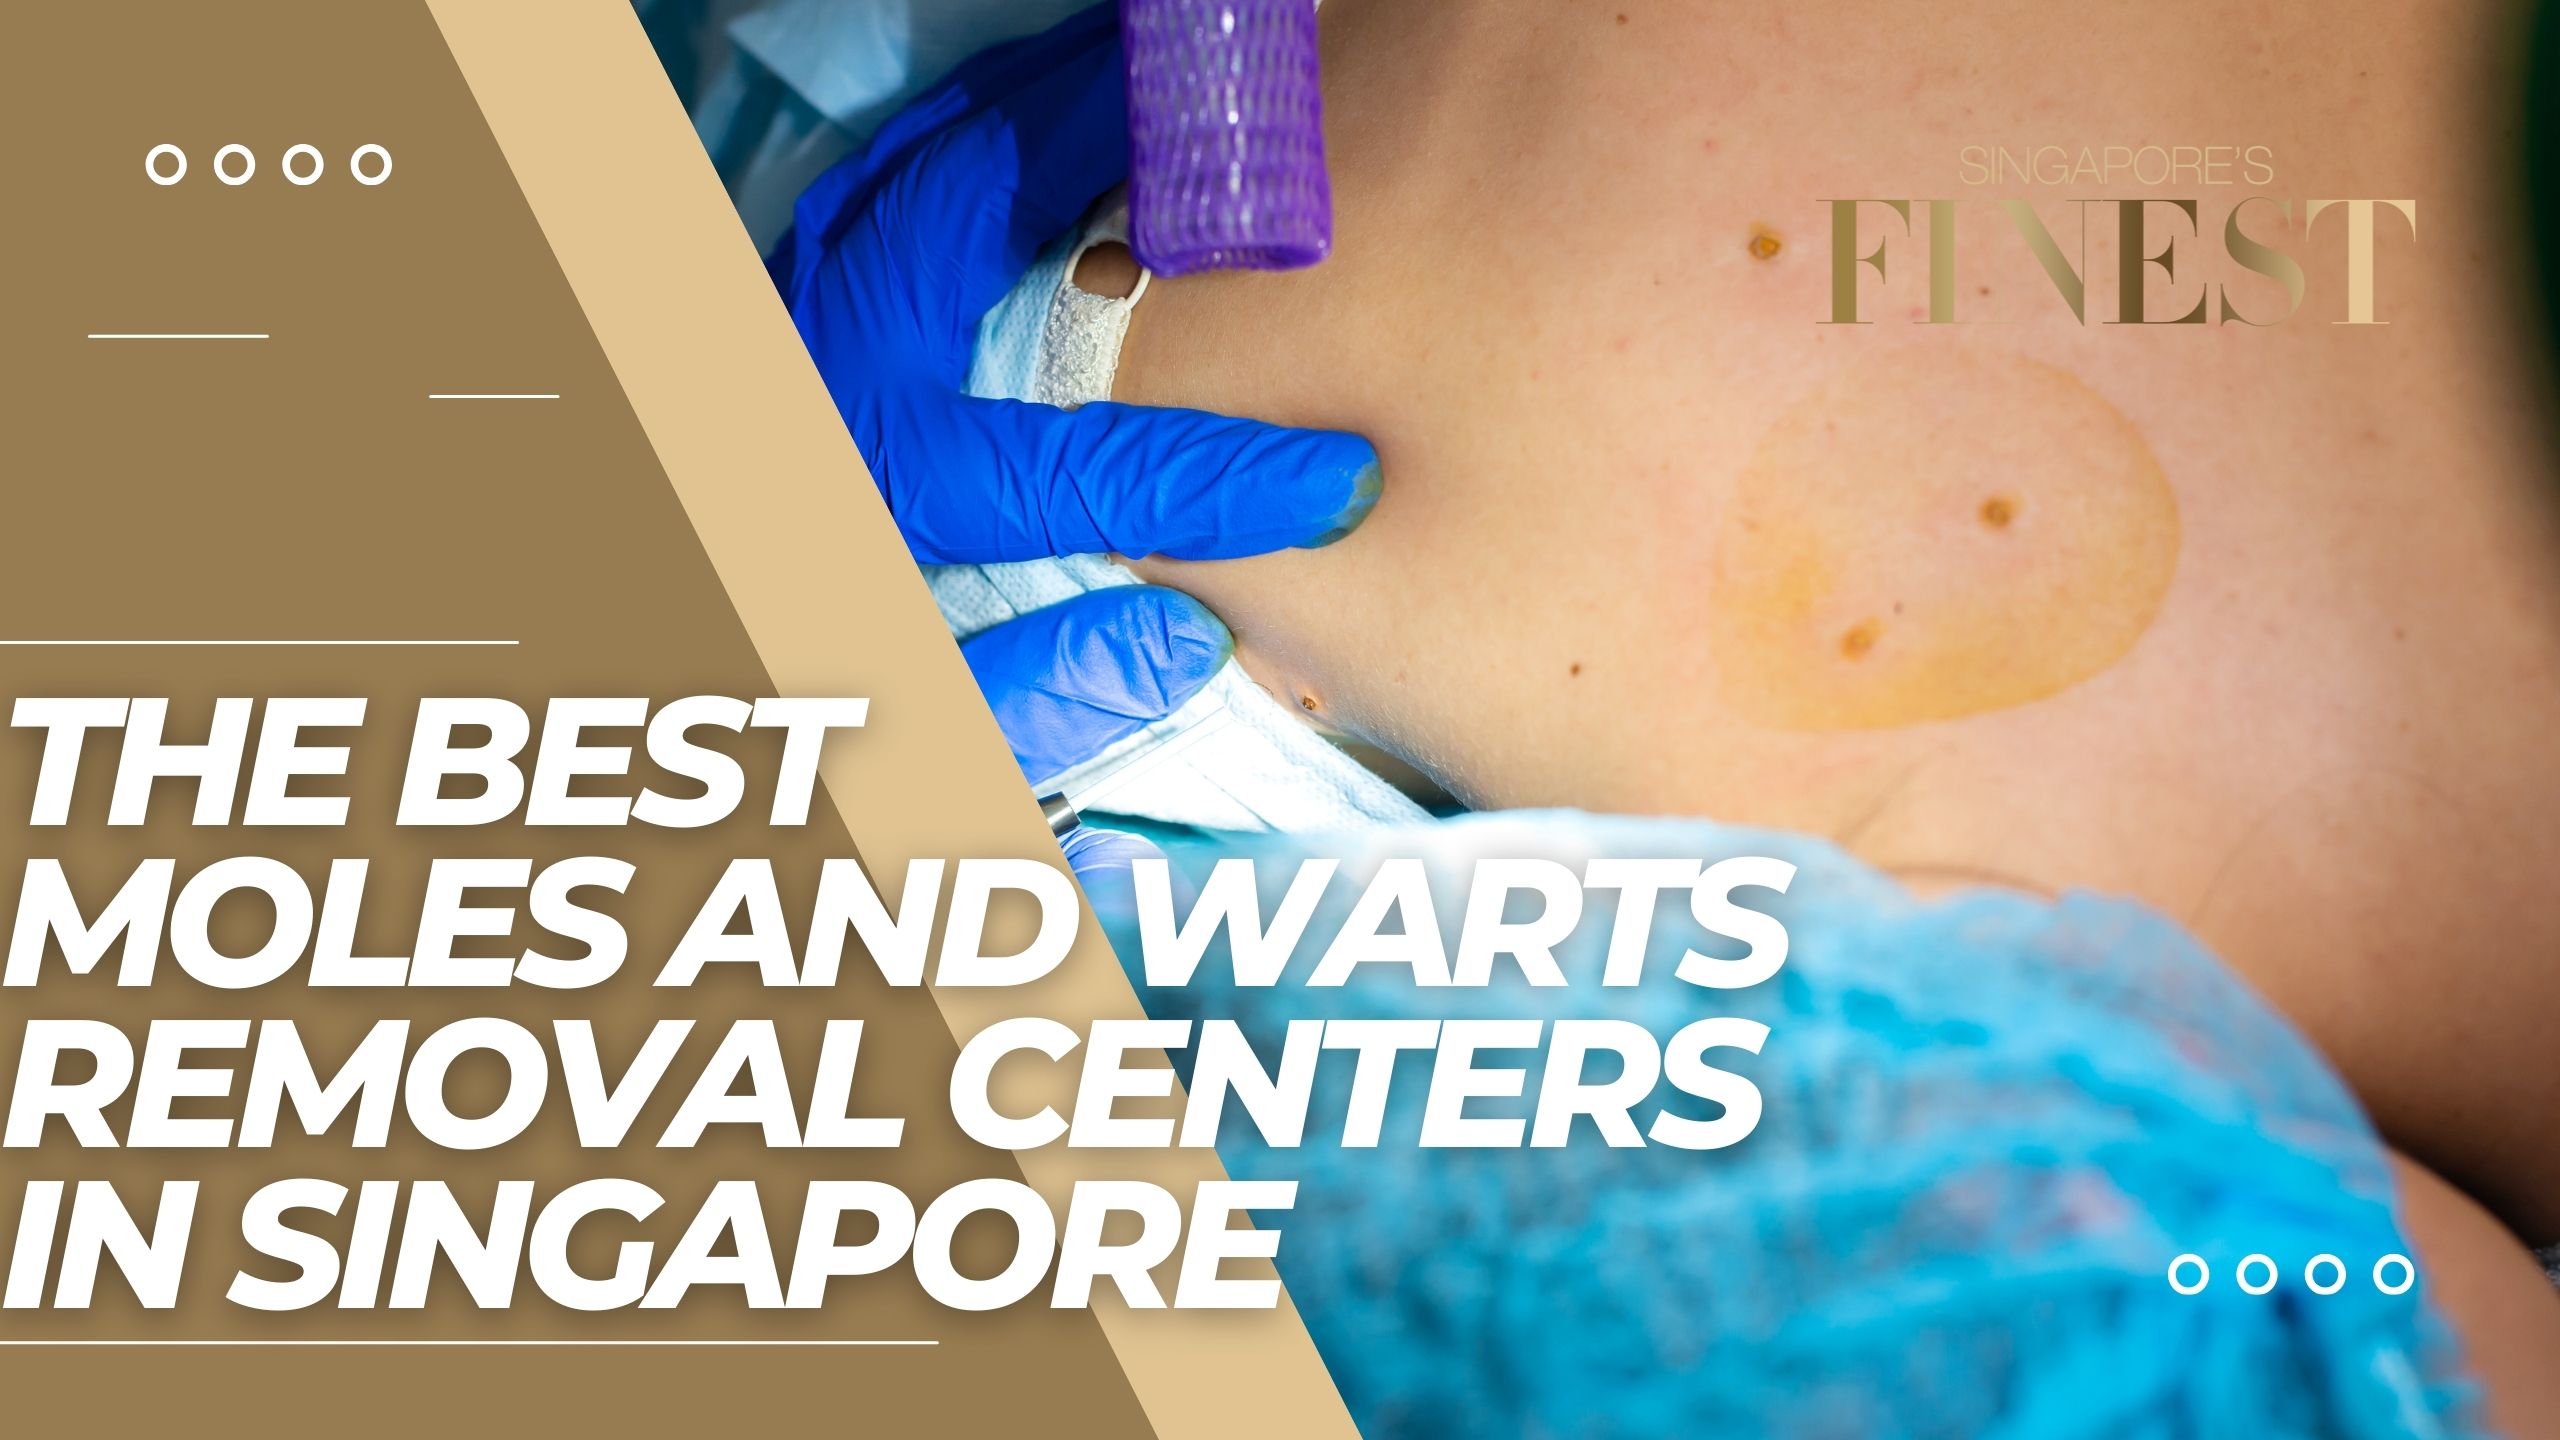 The Finest Moles and Warts Removal Centers in Singapore